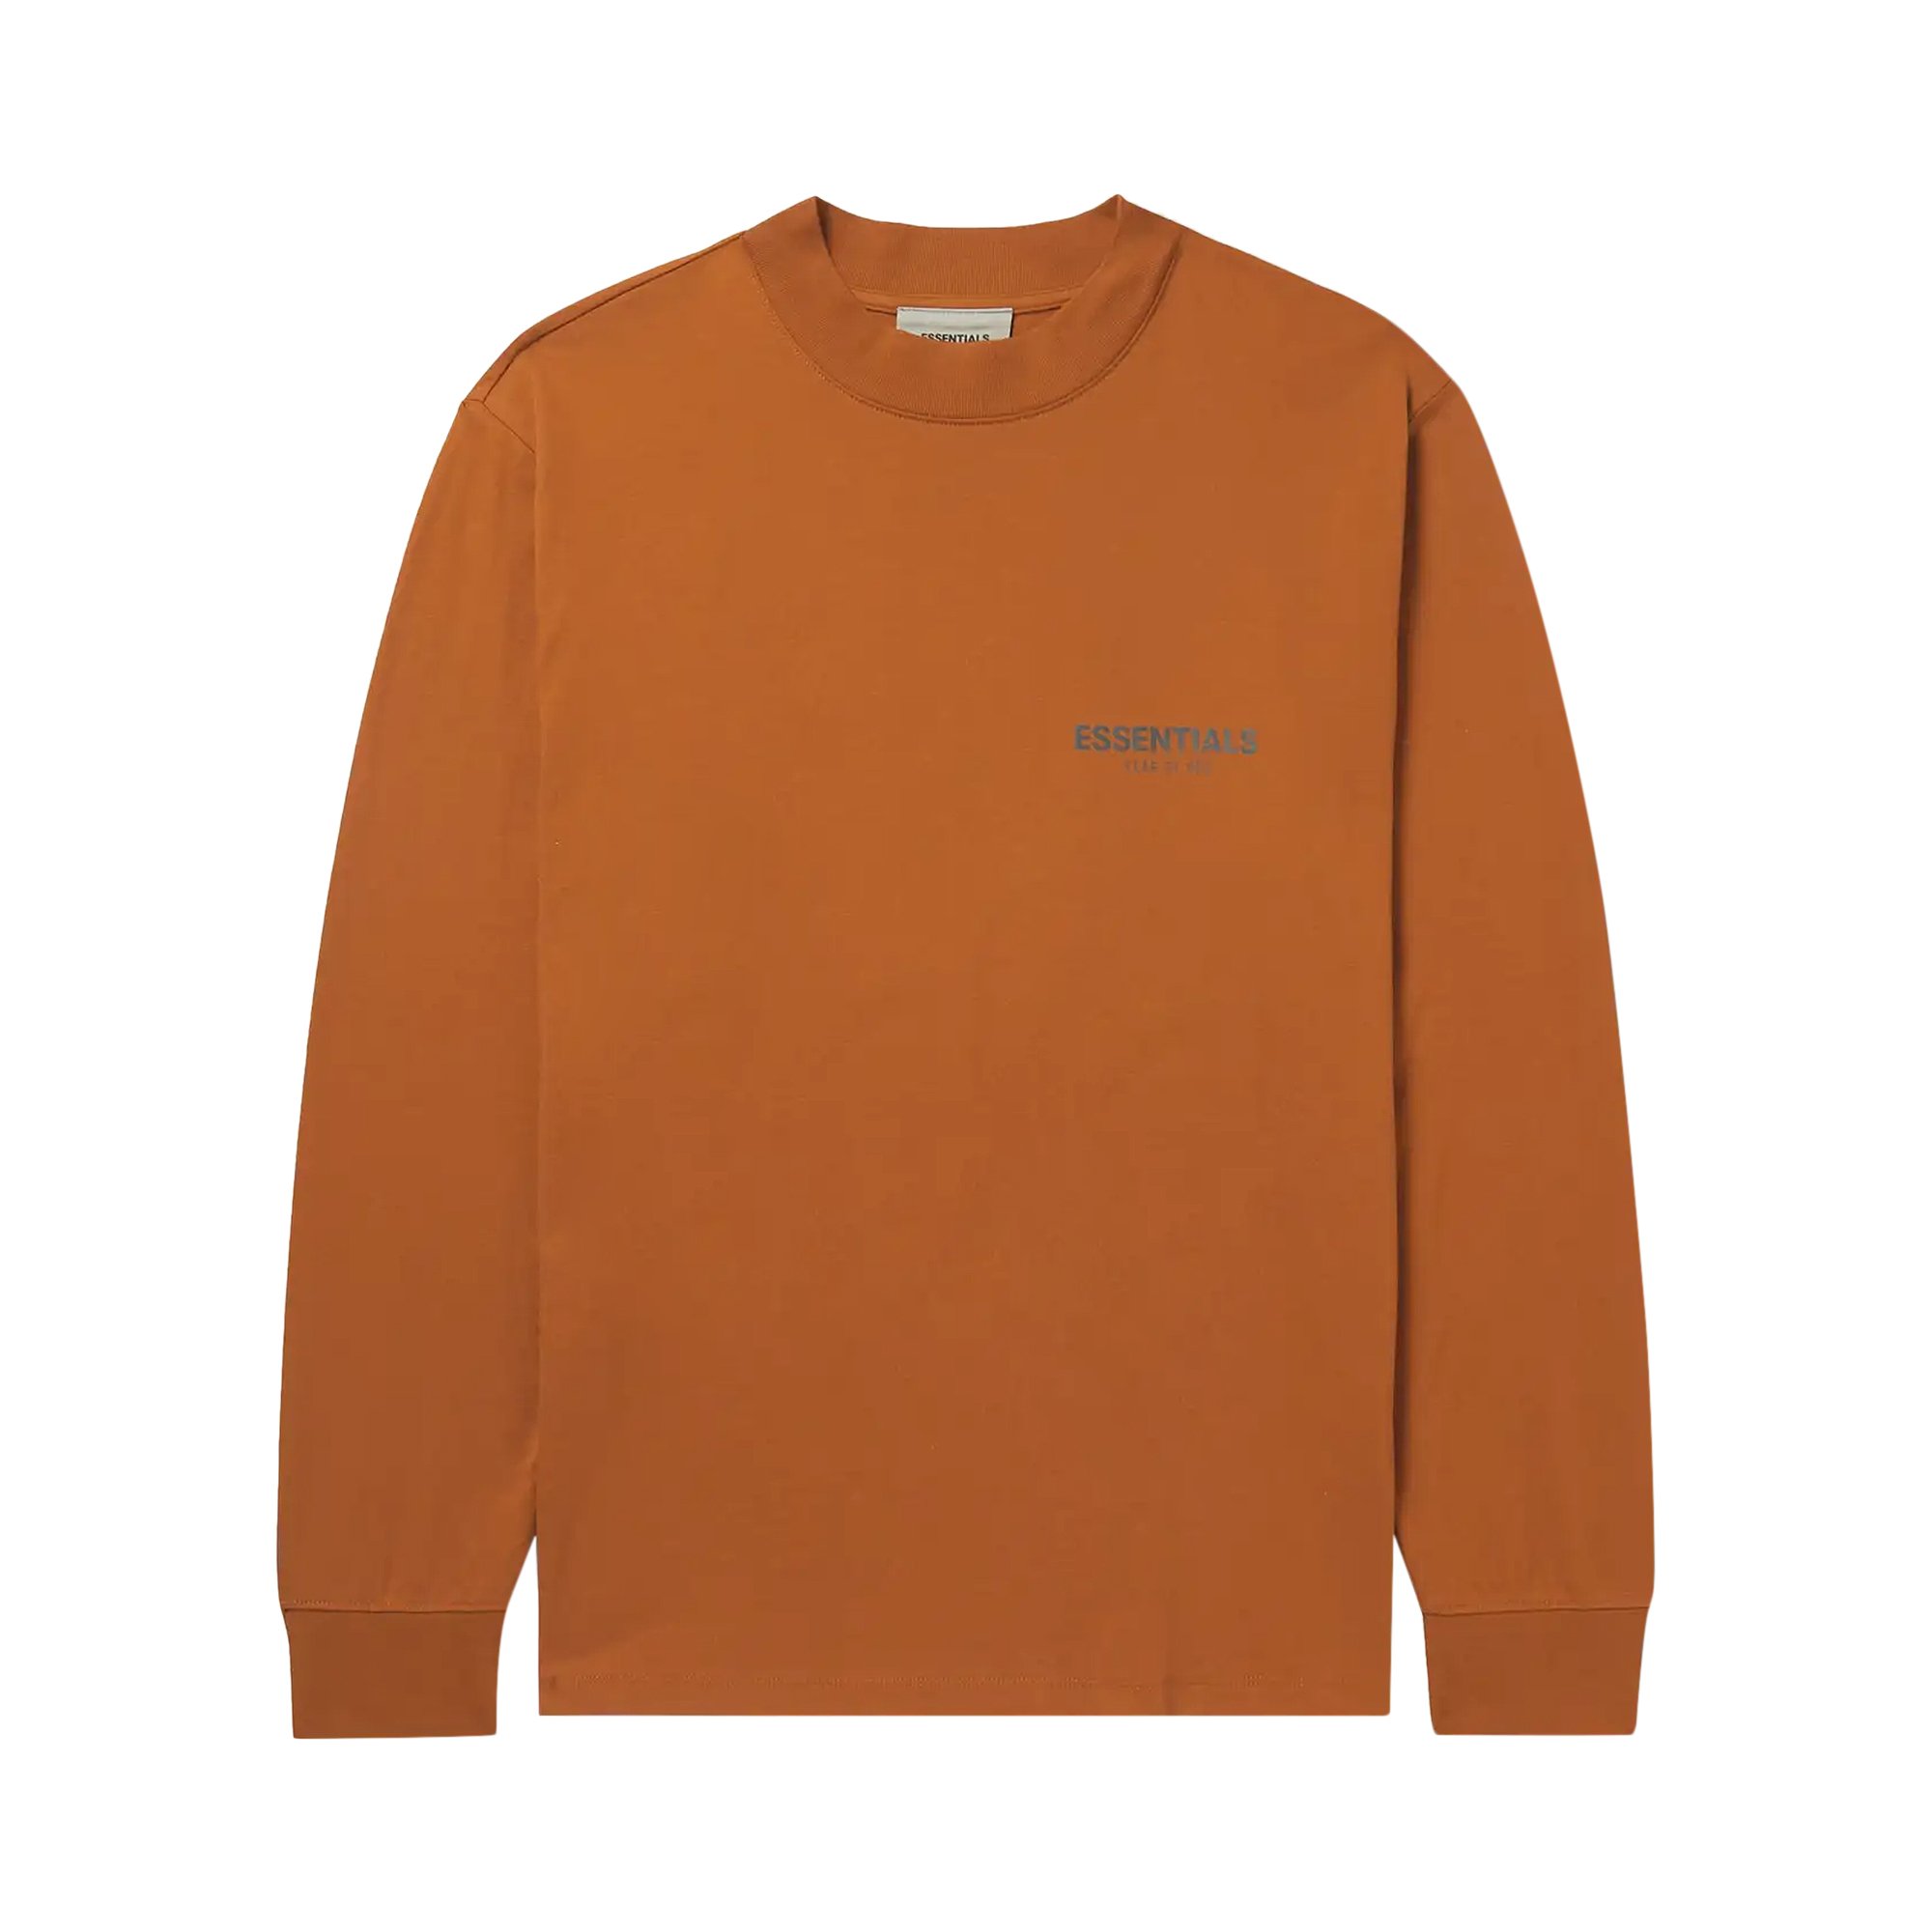 Fear of God Essentials x Mr. Porter Exclusive Long-Sleeve T-Shirt 'Vicunia'